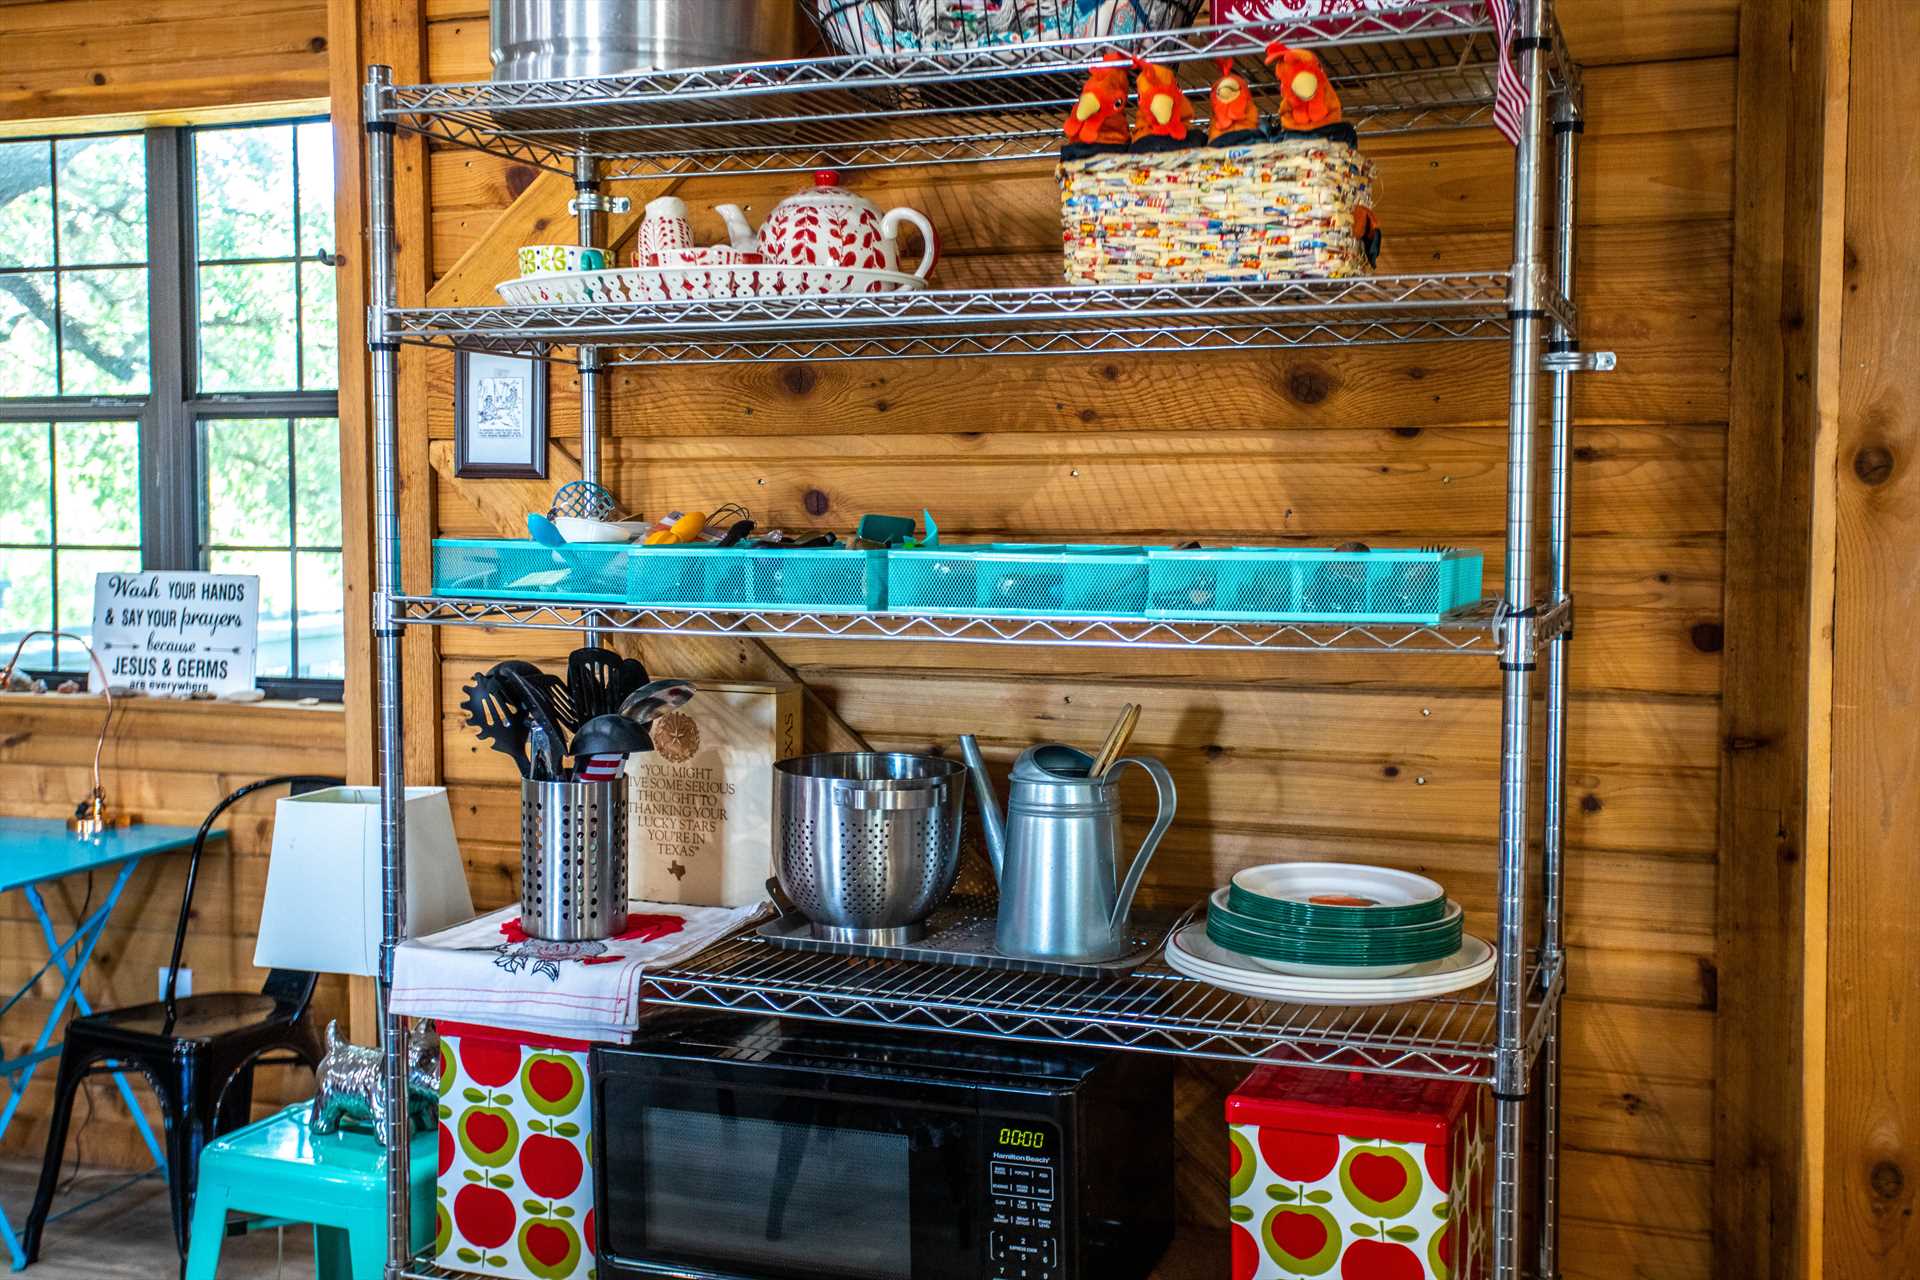                                                 To add even more function and convenience to the kitchen, there's also plenty of cooking ware, serving ware, glasses, and utensils!